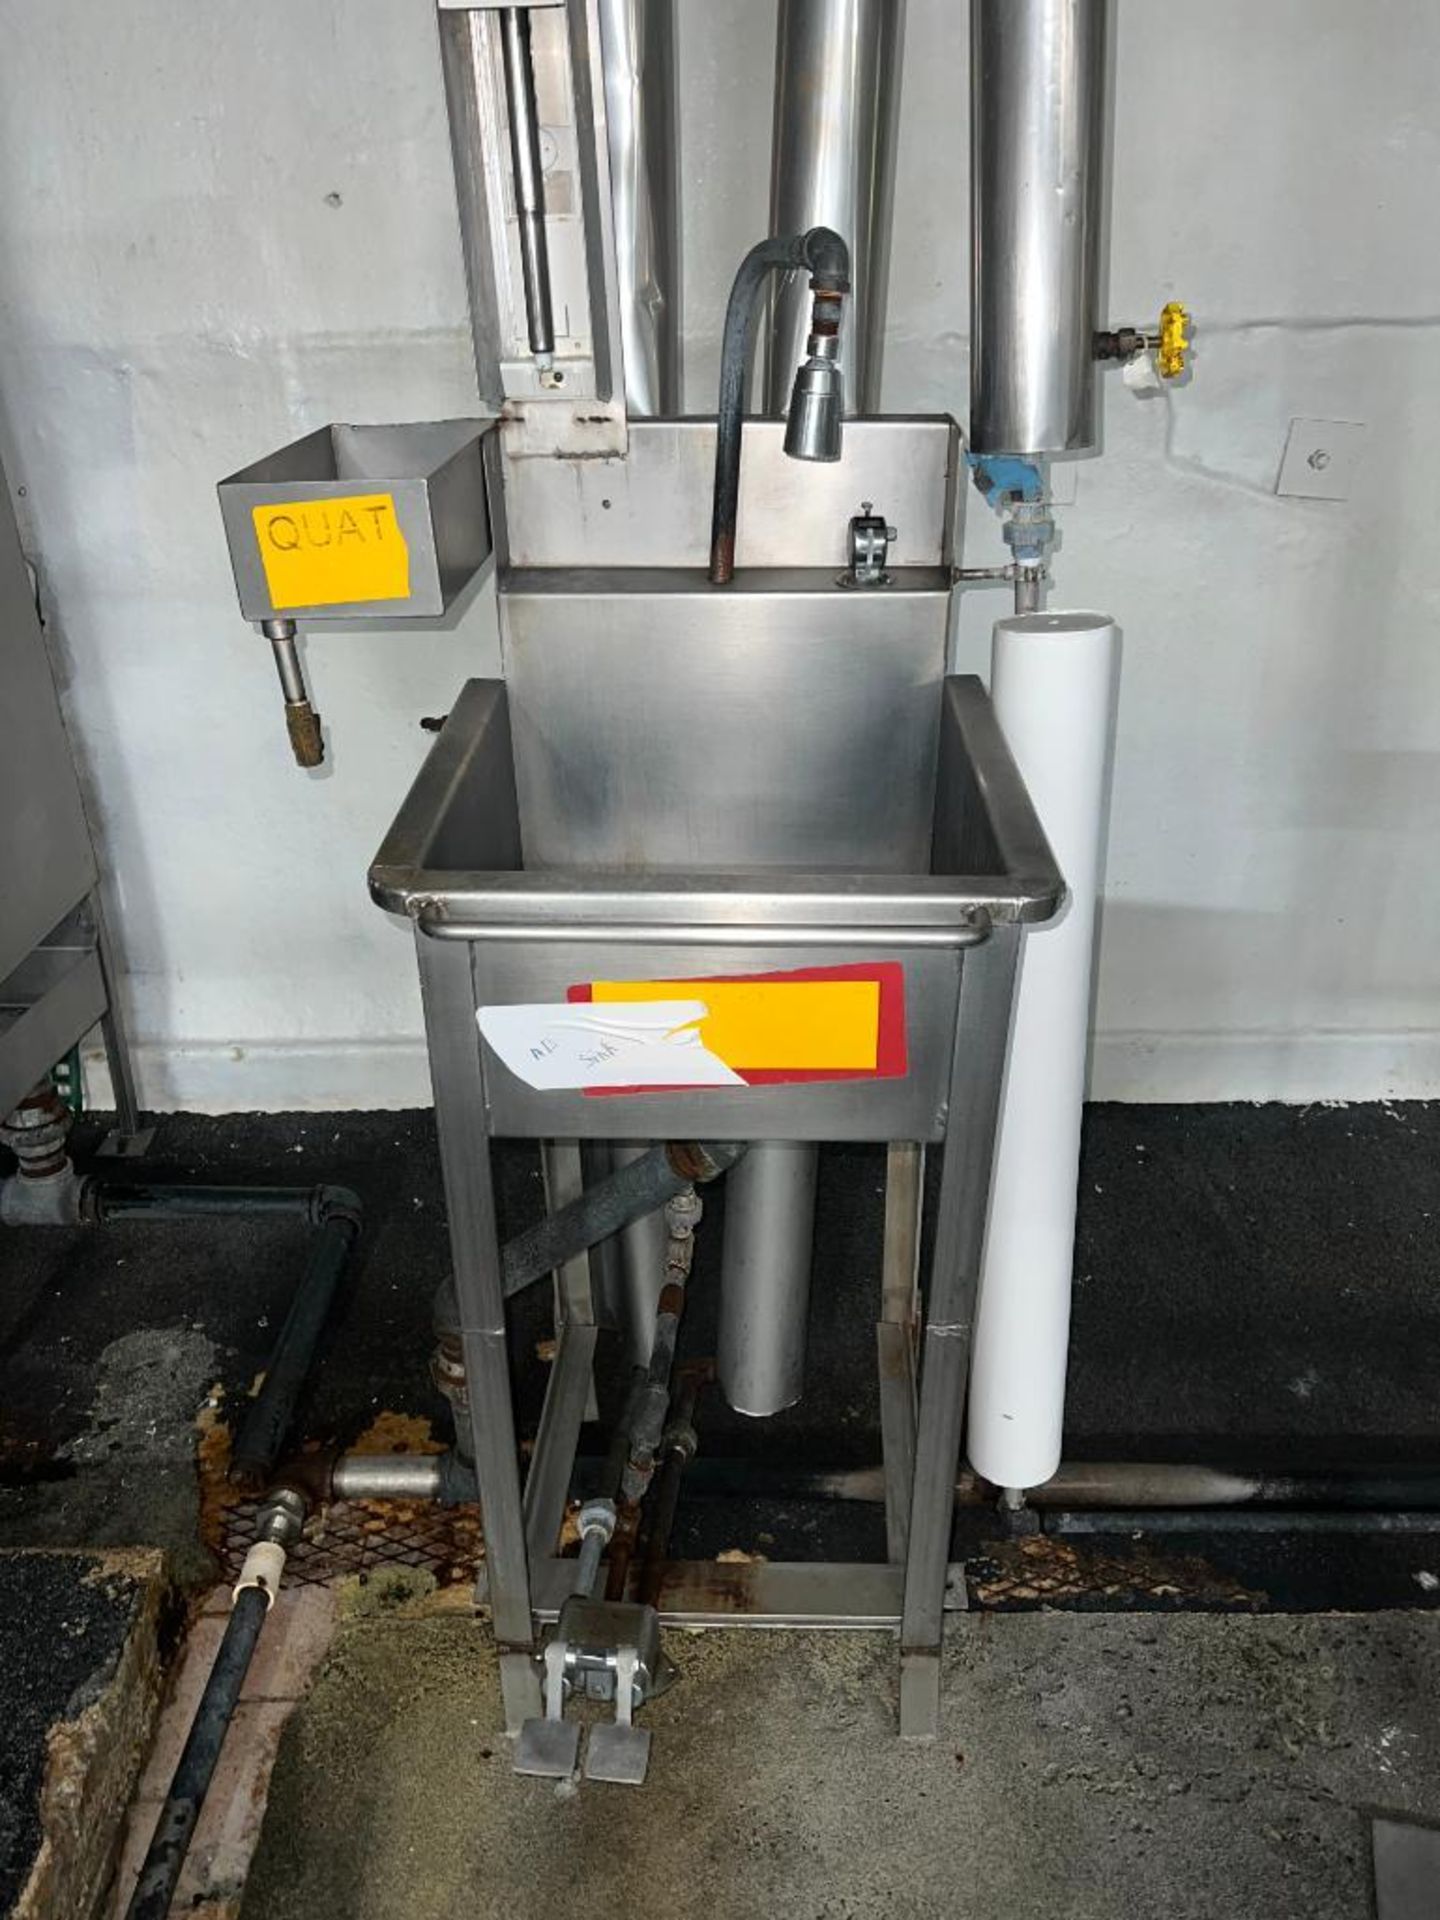 (3) S/S Sinks with Foot Controls and Assorted Wash Cabinets and Bins - Rigging Fee: $300 - Image 3 of 6